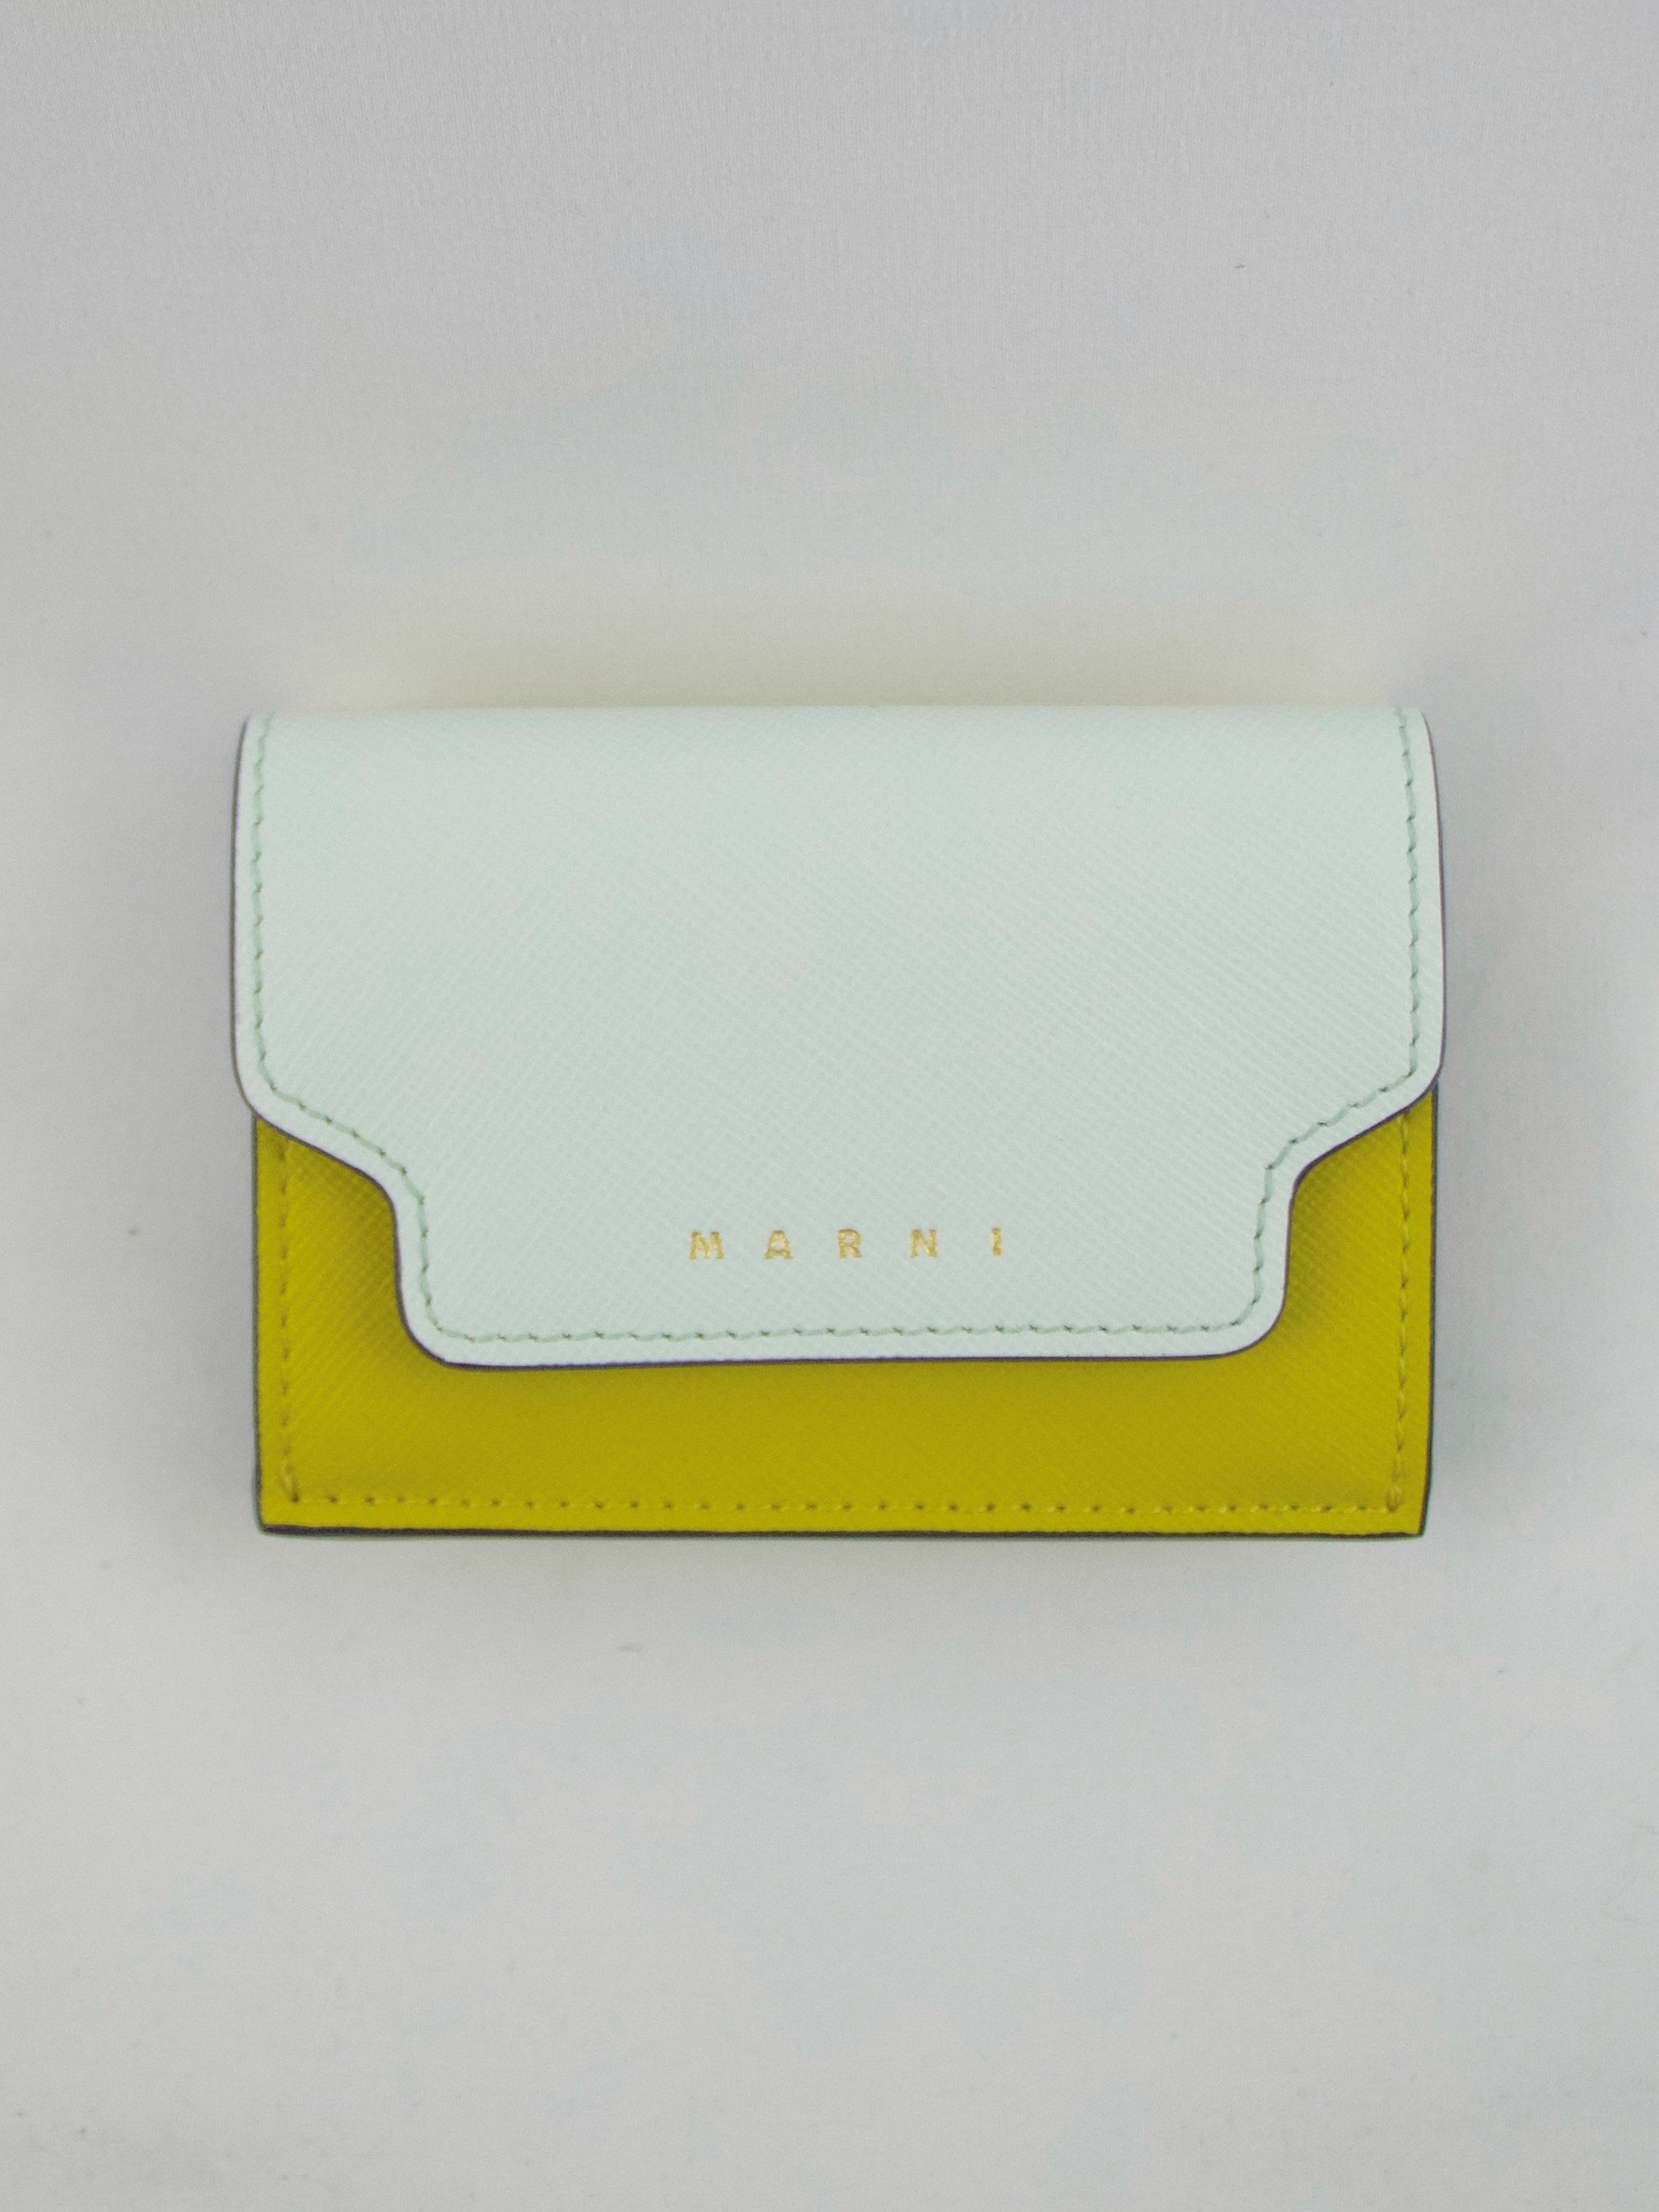 <img class='new_mark_img1' src='https://img.shop-pro.jp/img/new/icons23.gif' style='border:none;display:inline;margin:0px;padding:0px;width:auto;' />【30%OFF】MARNI Leather wallet